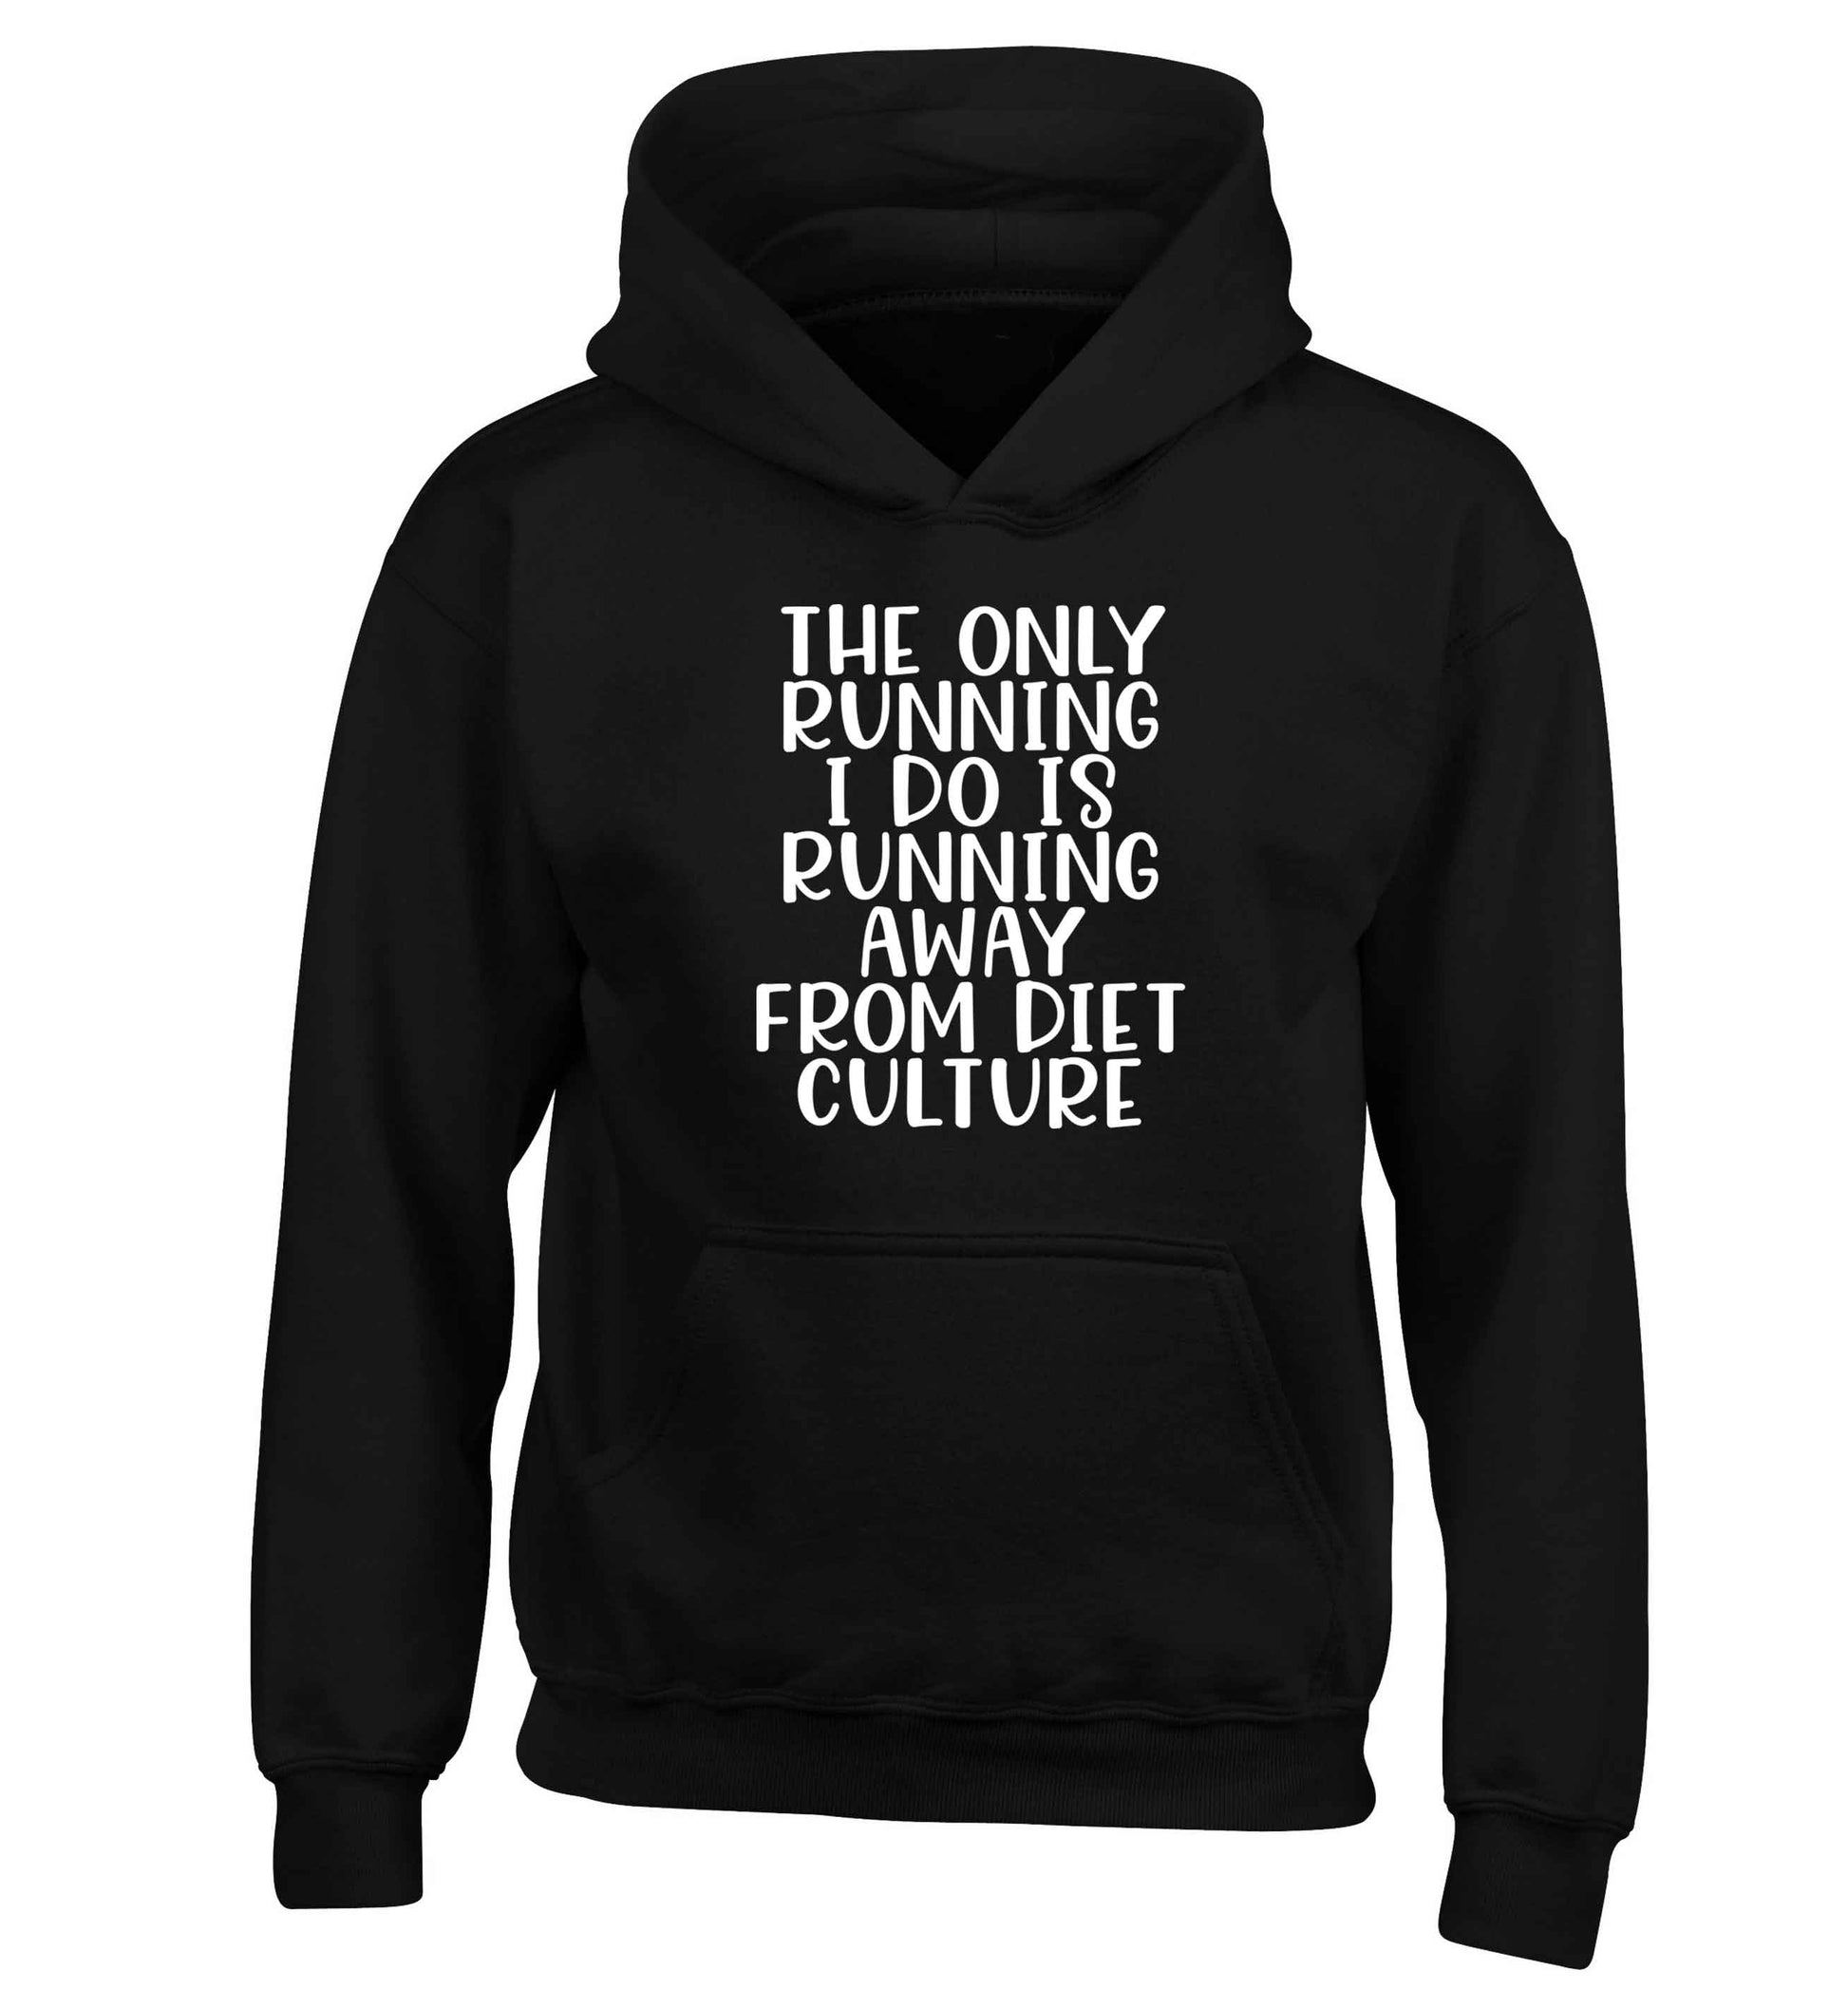 The only running I do is running away from diet culture children's black hoodie 12-13 Years